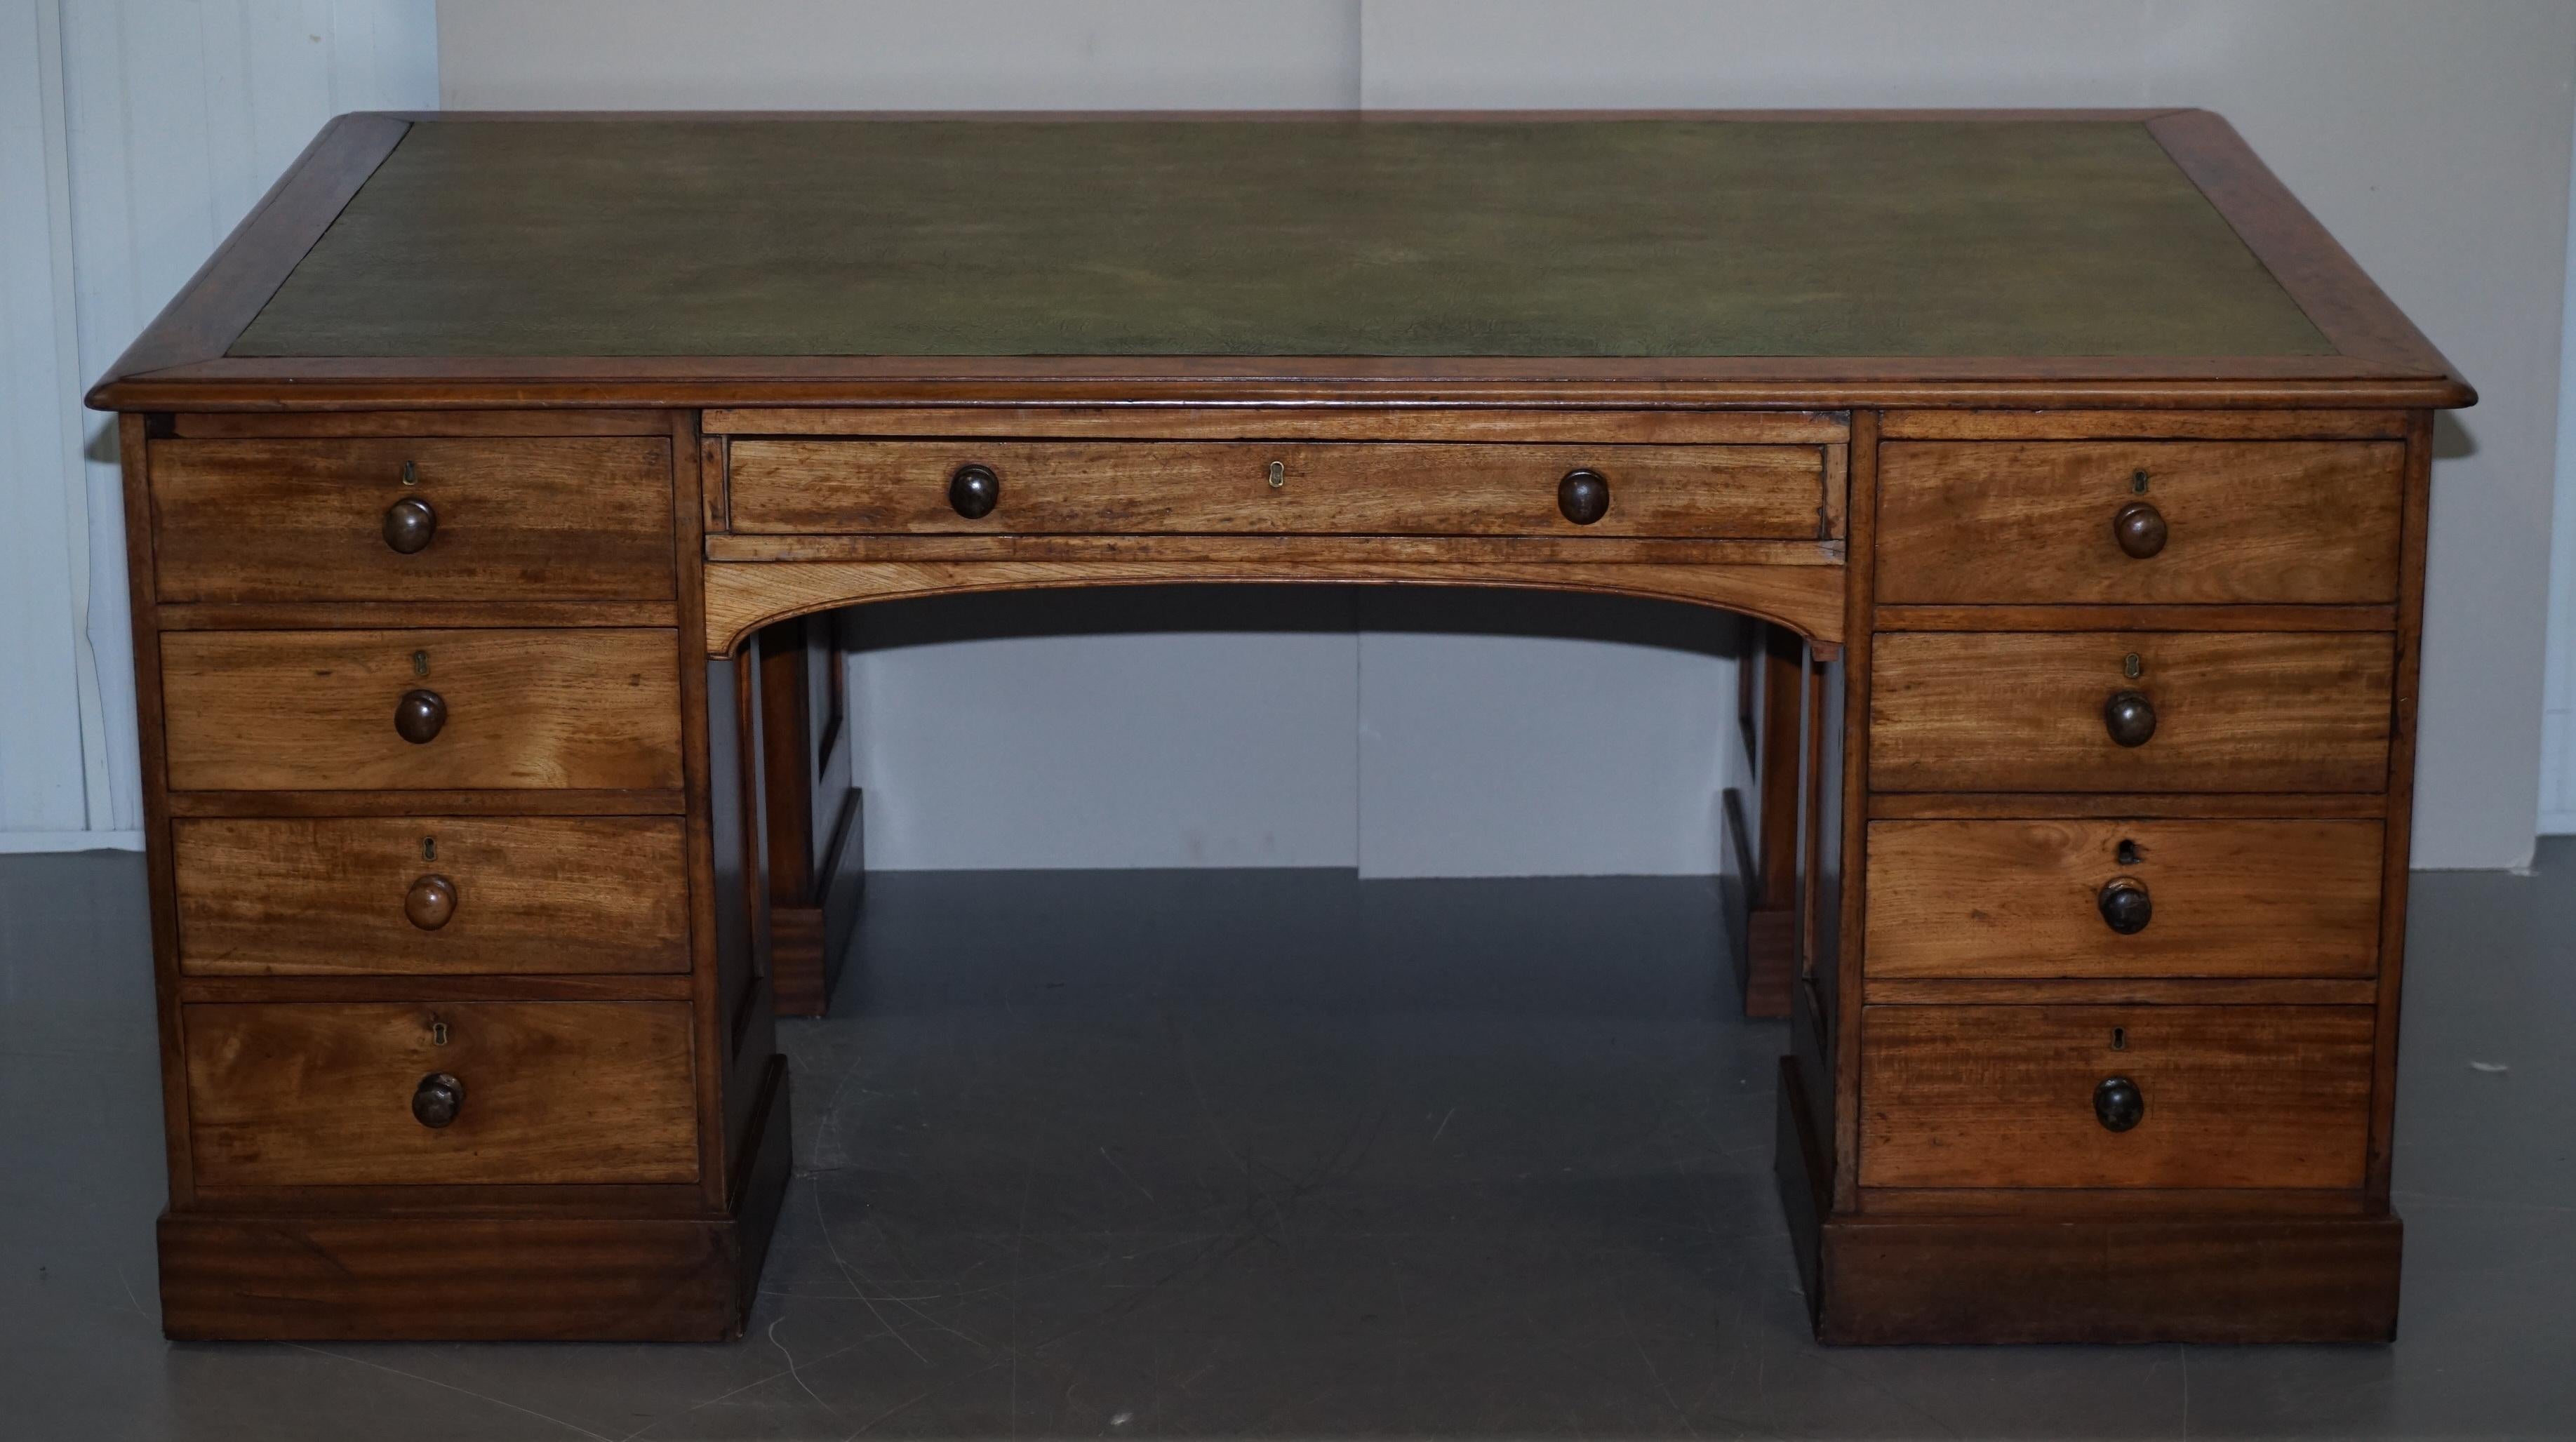 We are delighted to this very rare flamed mahogany quad four sided pedestal partners desk with green leather top

This is a very rare and collectable desk, designed for four people to use at the same time, having quad pedestals you can use four